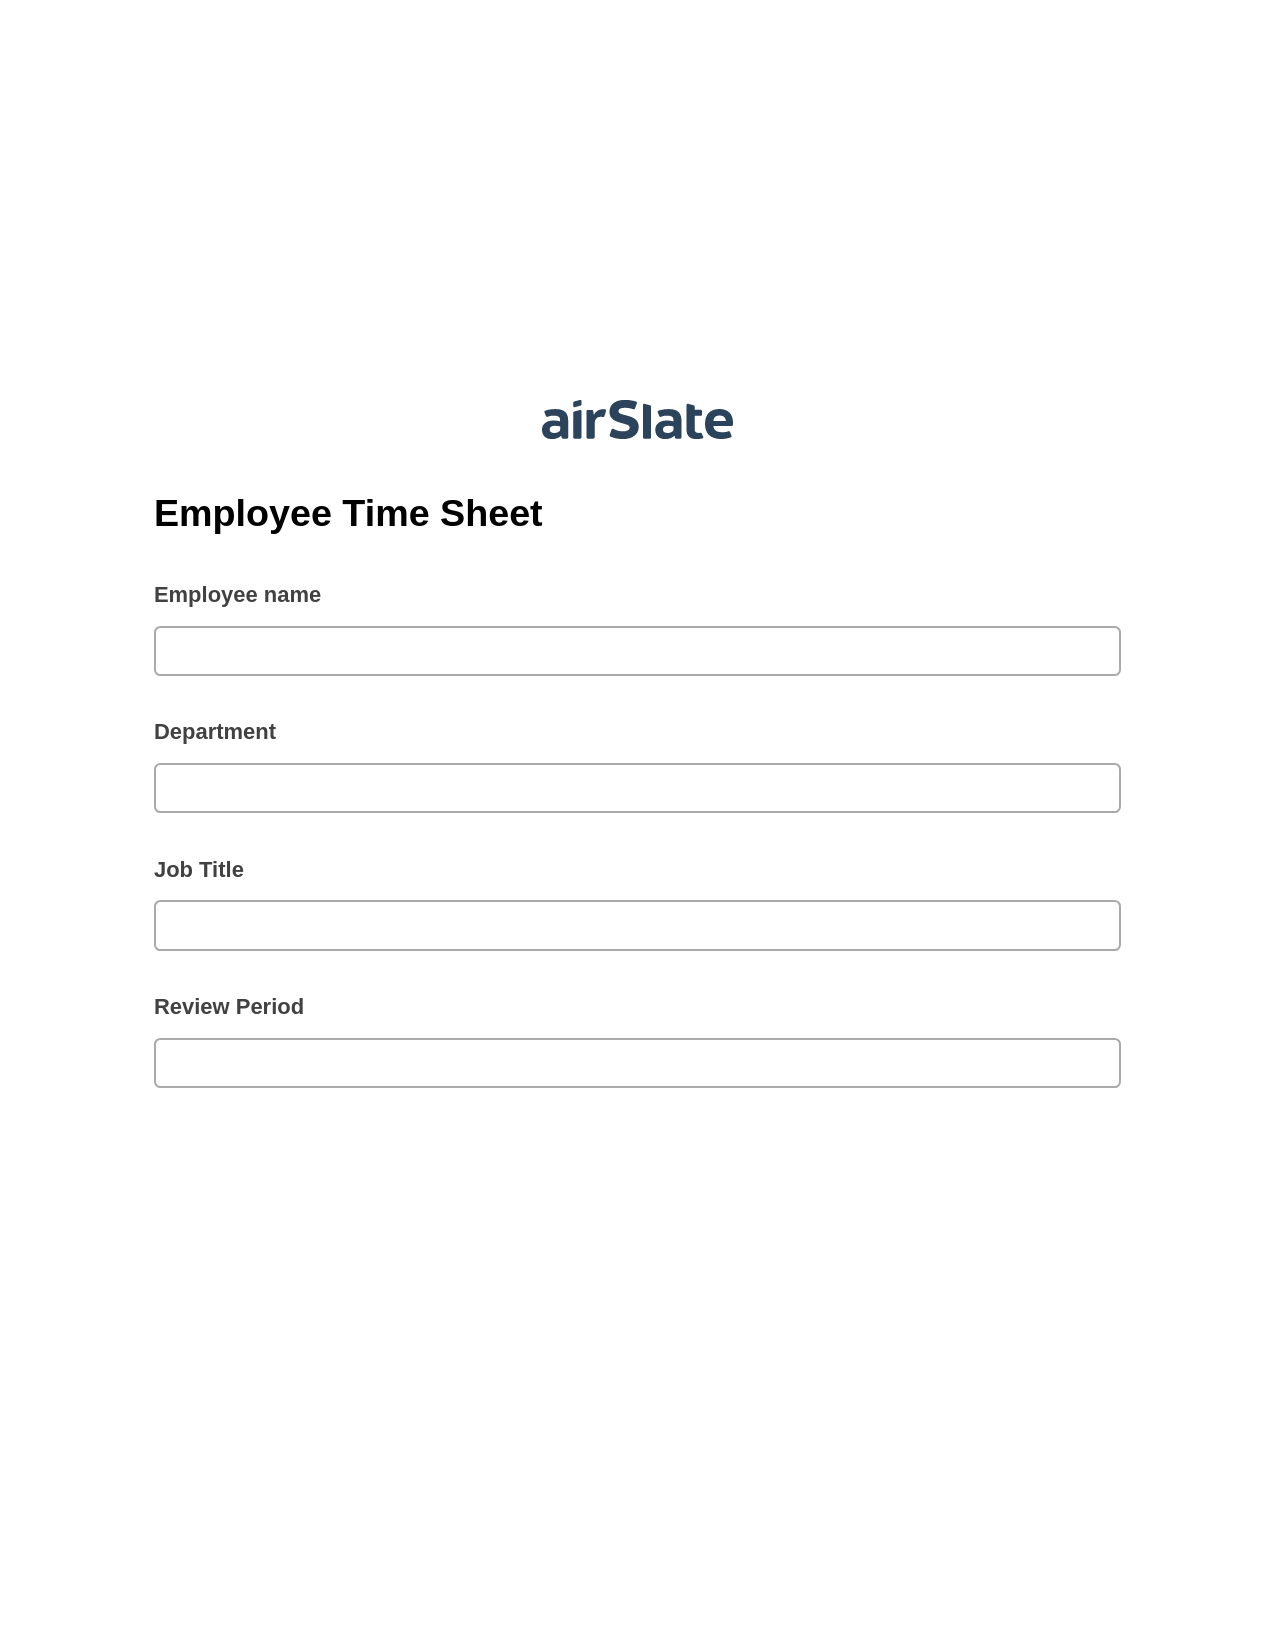 Multirole Employee Time Sheet Pre-fill Dropdowns from Airtable, Create slate addon, Export to NetSuite Bot